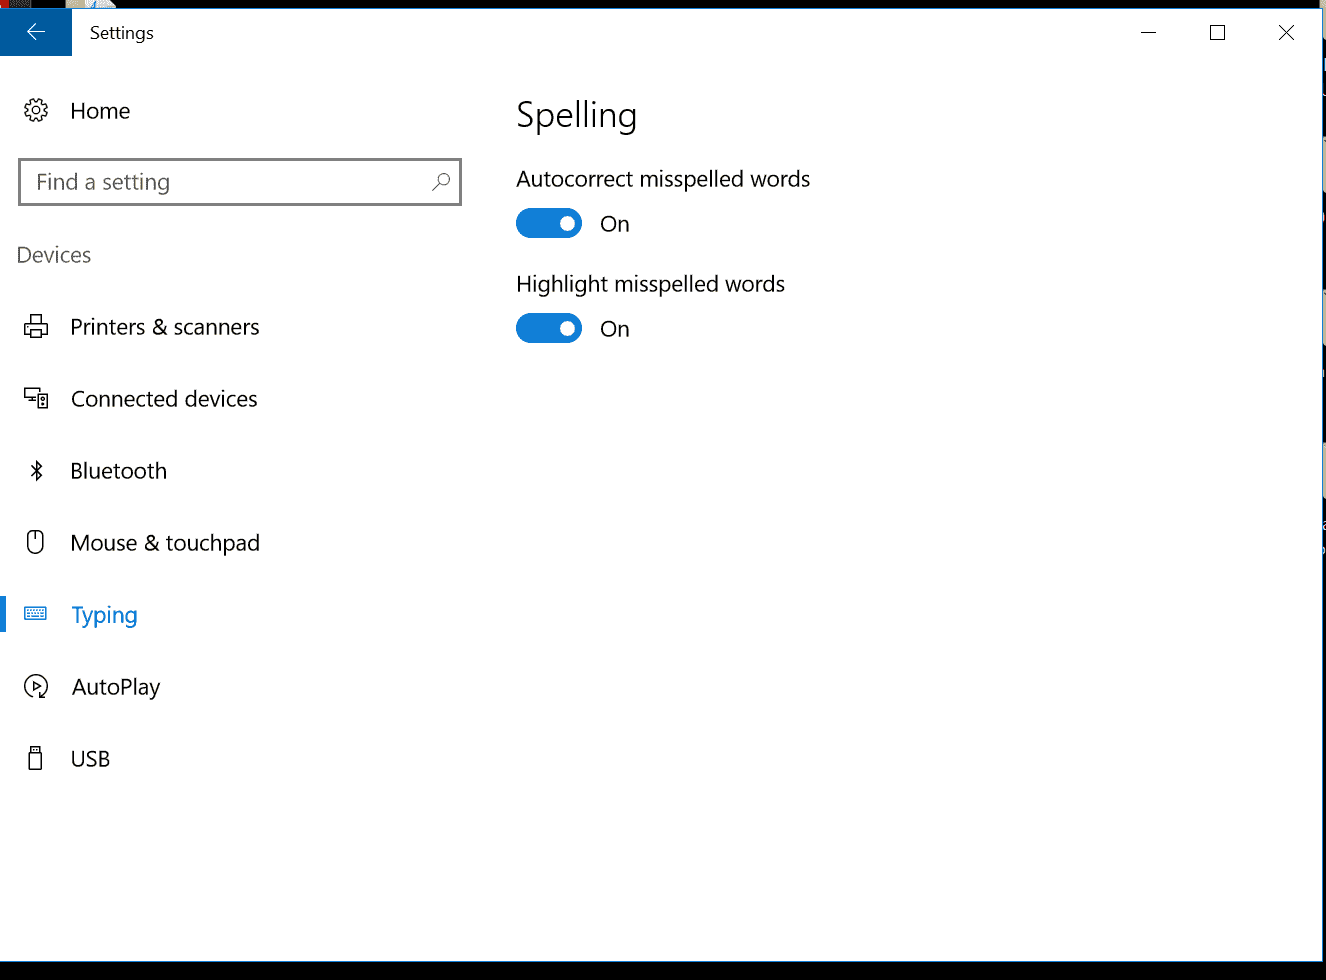 Windows 10 touch keyboard settings missing 07af24df-2a84-434c-bab4-8334e6a2b36b?upload=true.png